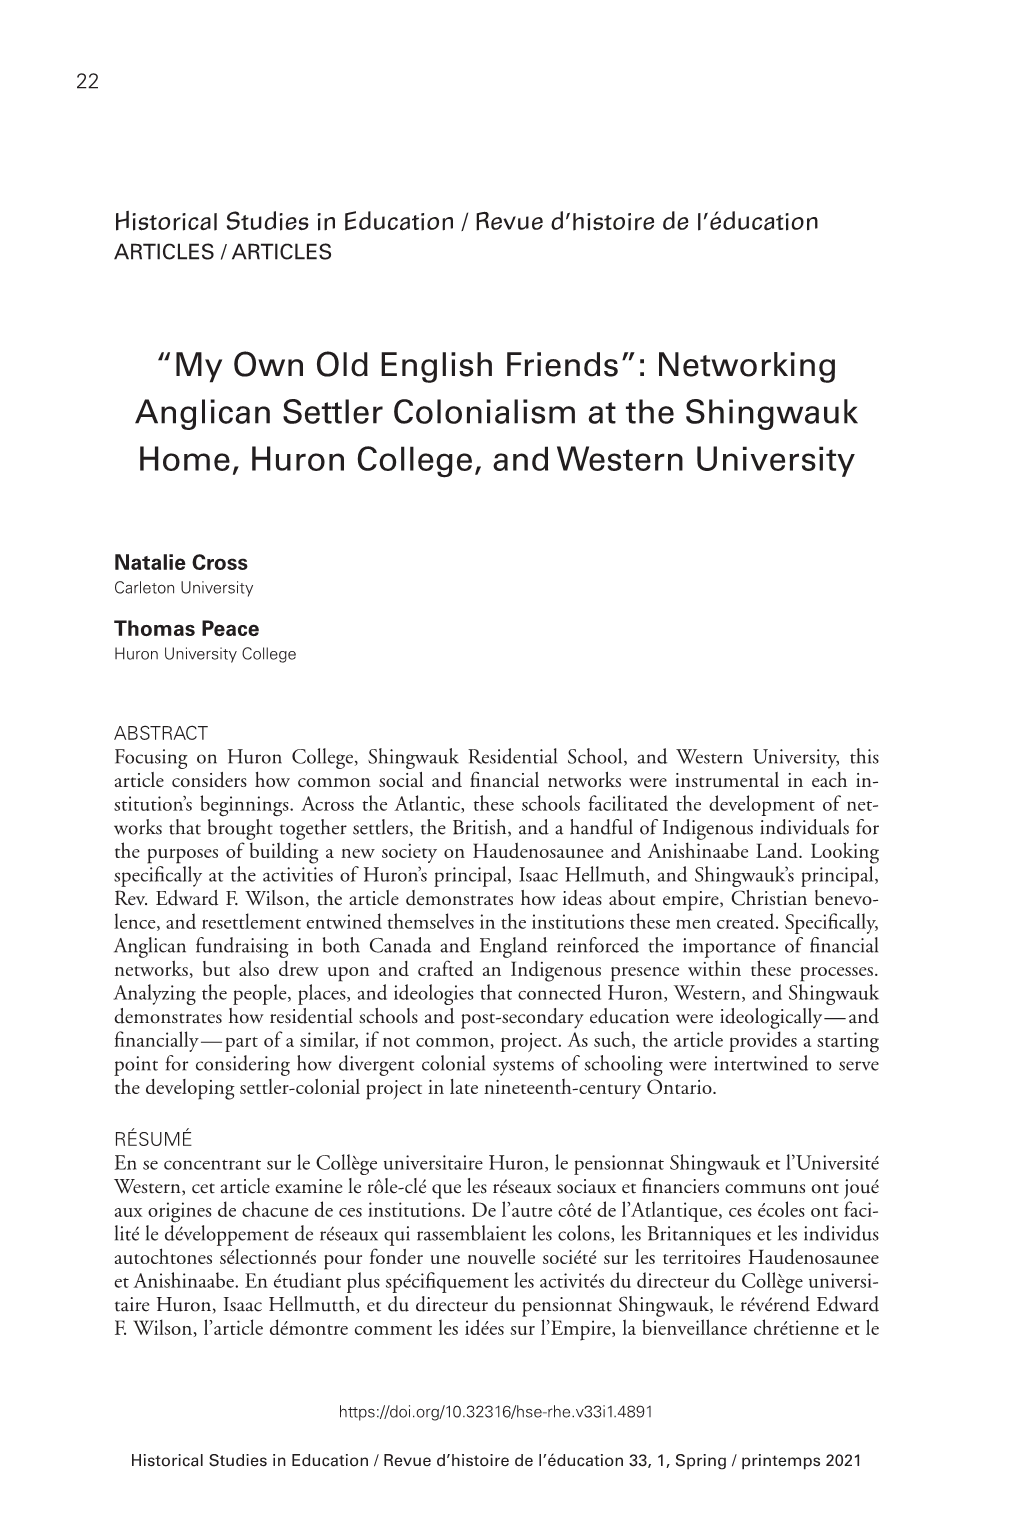 Networking Anglican Settler Colonialism at the Shingwauk Home, Huron College, and Western University